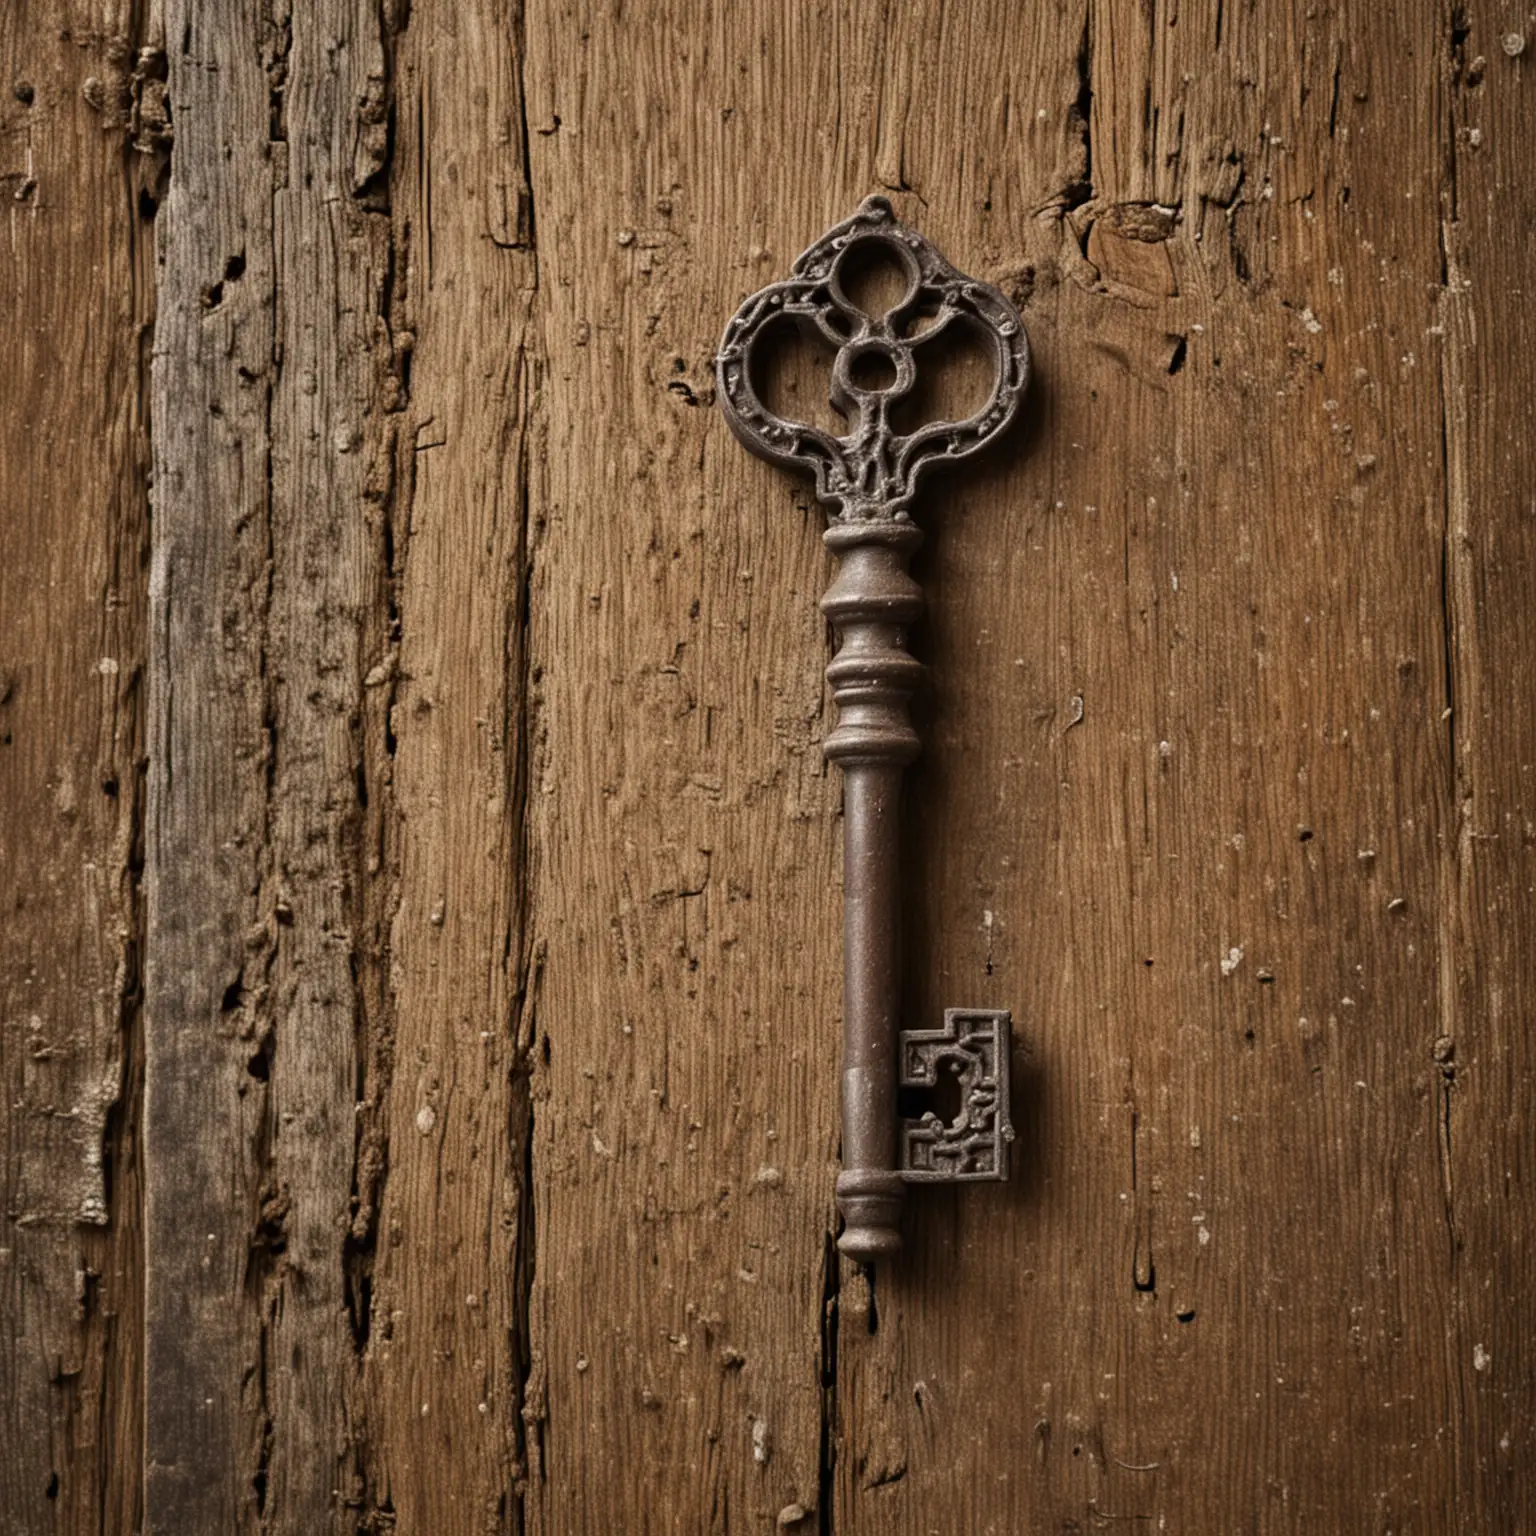 Ancient Medieval Key with Ornate Design and Rustic Patina